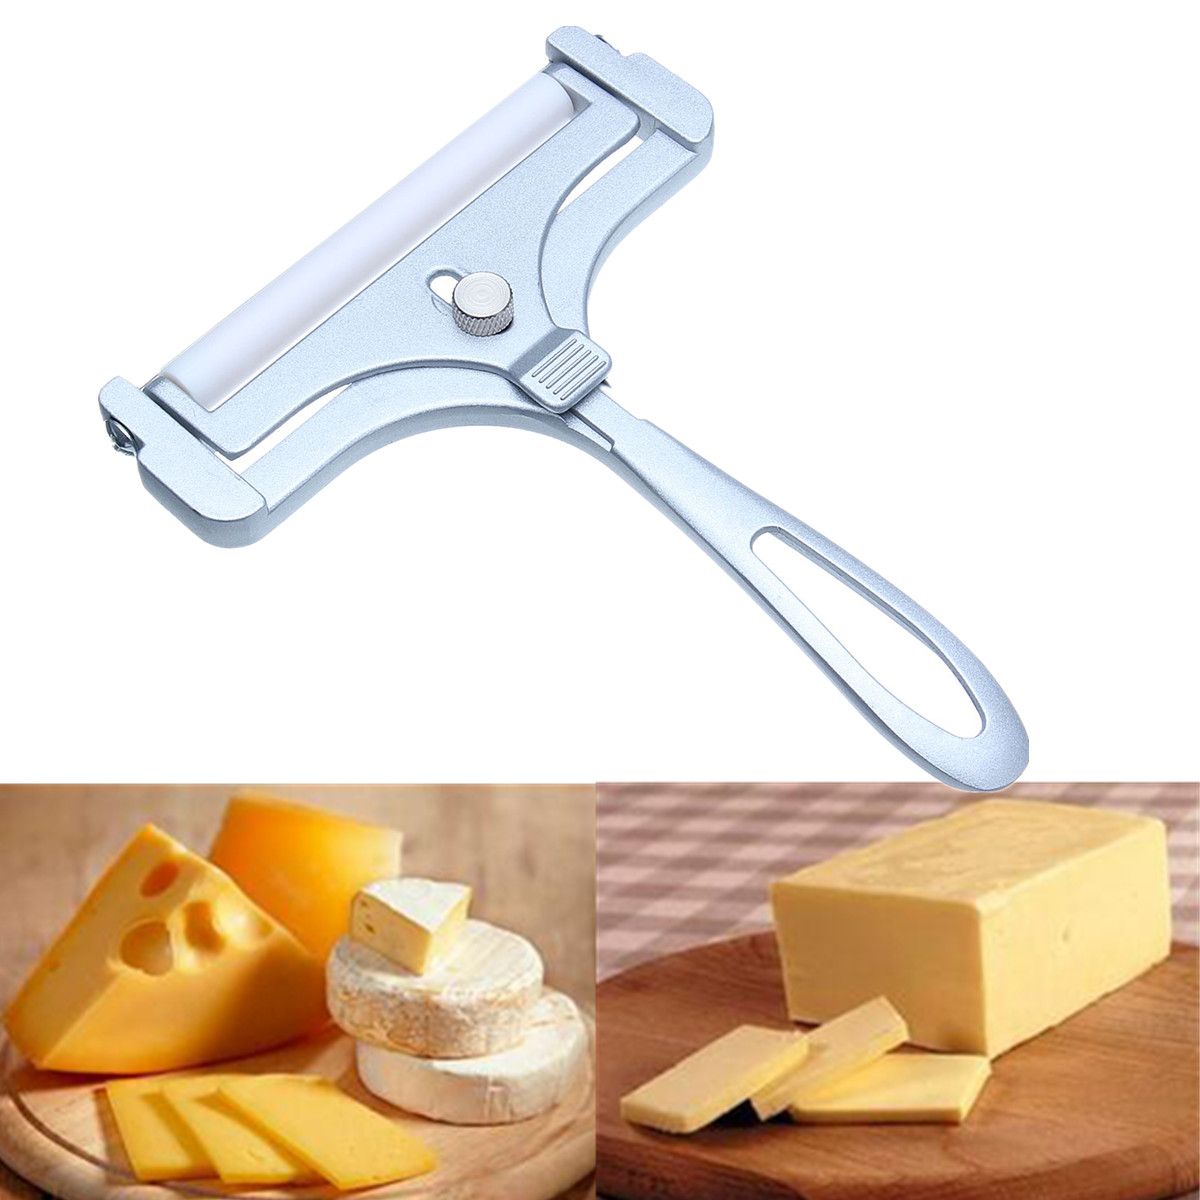 Adjustable-Stainless-Steel-Cutting-Cutter-Wire-Cheese-Slicer-1272251